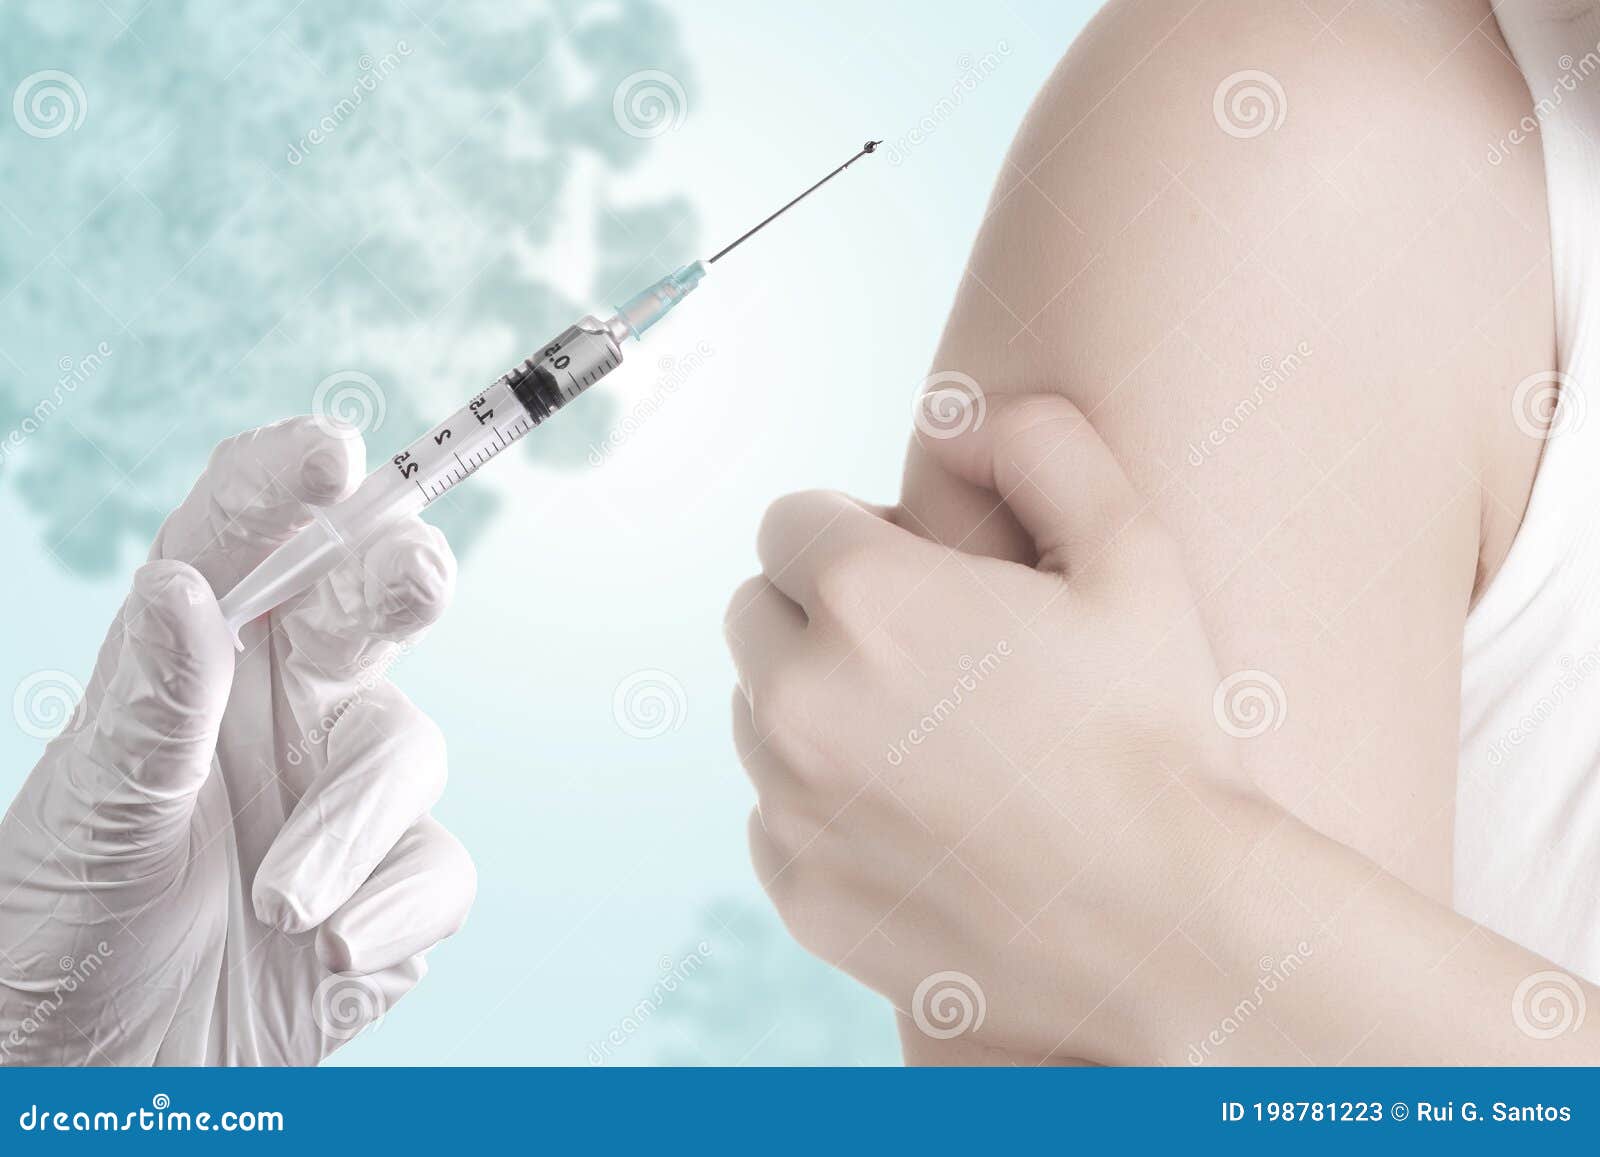 hand holding a syringe with covid-19 vaccine